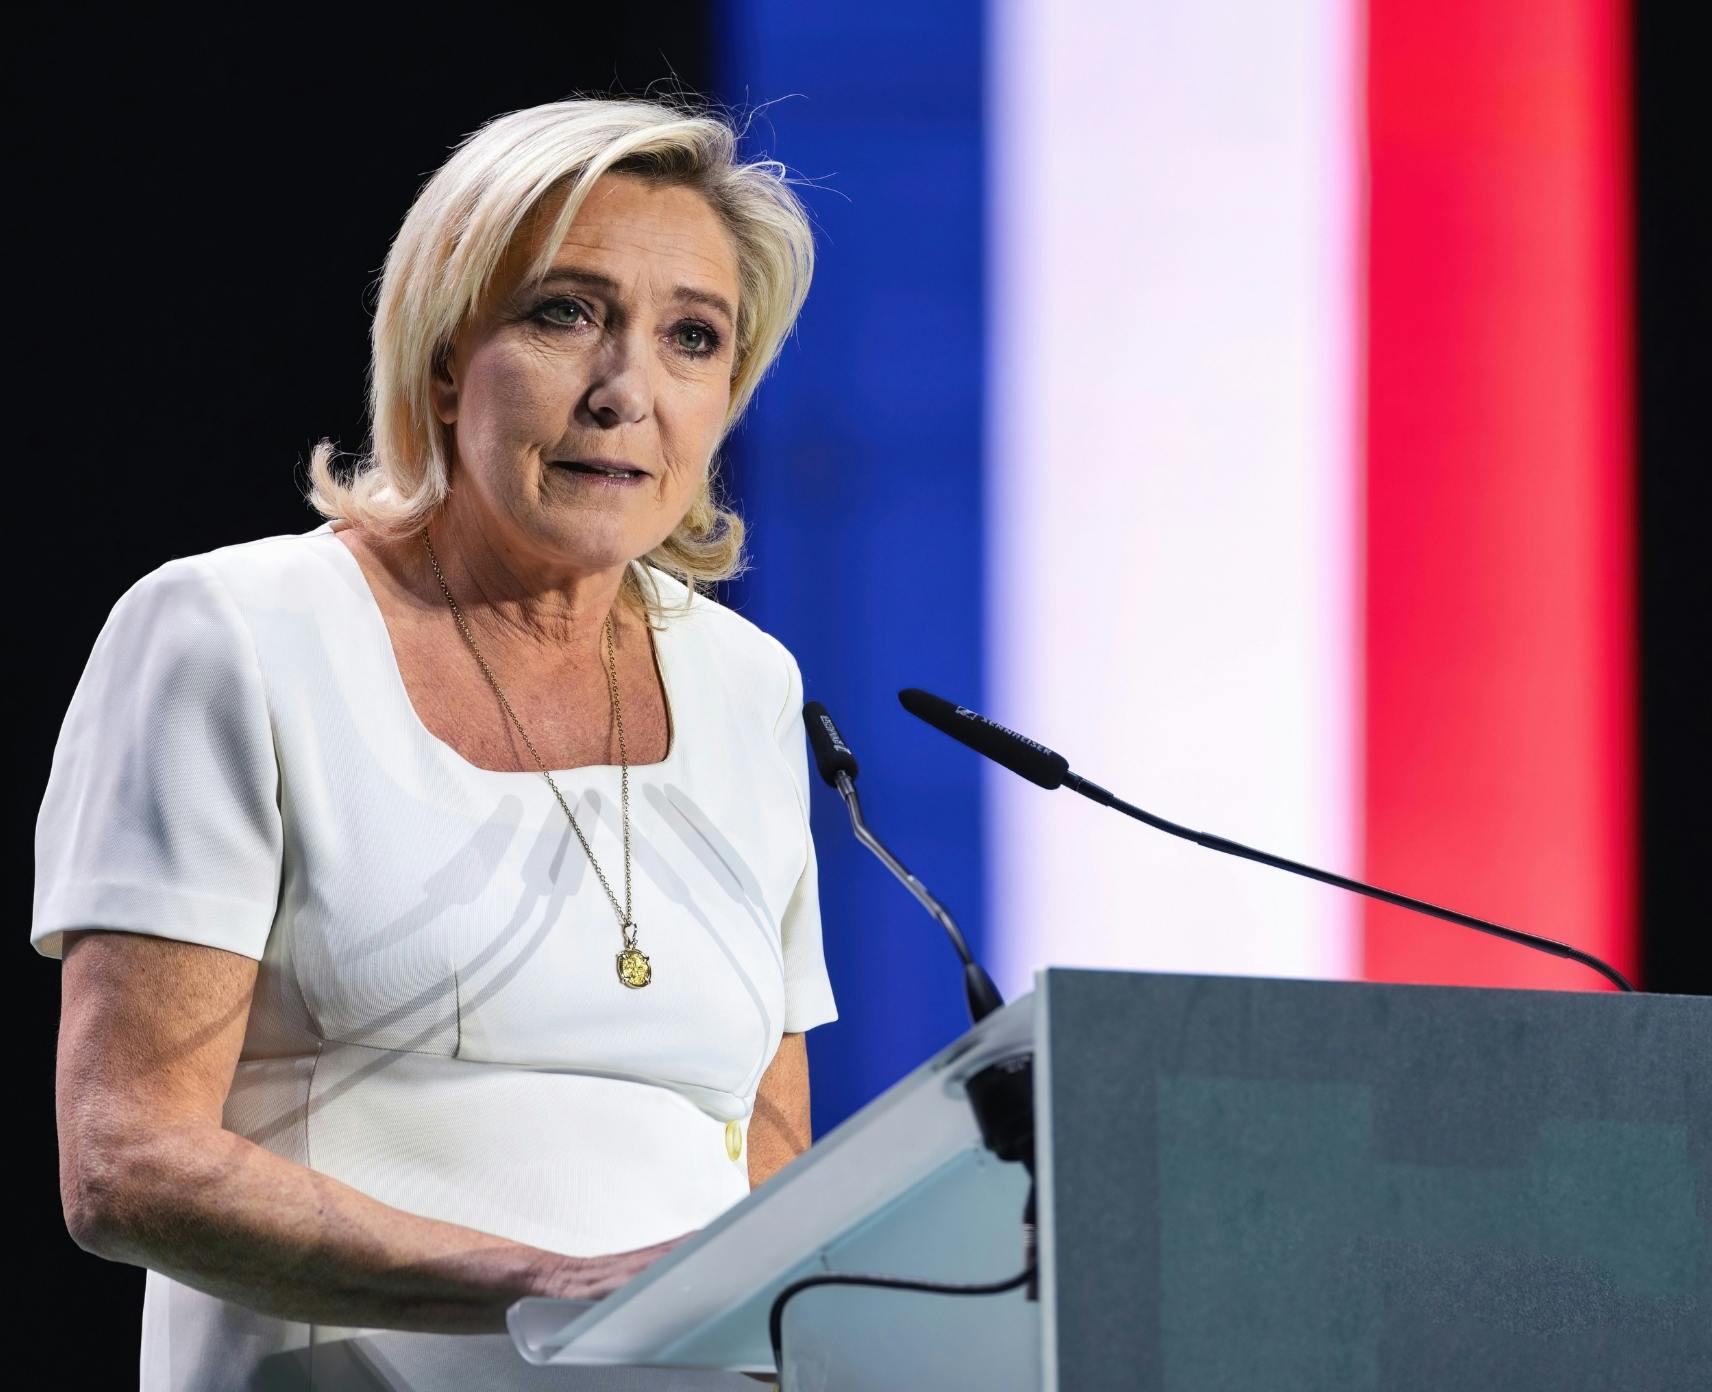 Marine Le Pen, leader of the far-right National Rally party in France. She is standing behind a podium and there is a French flag in the background.